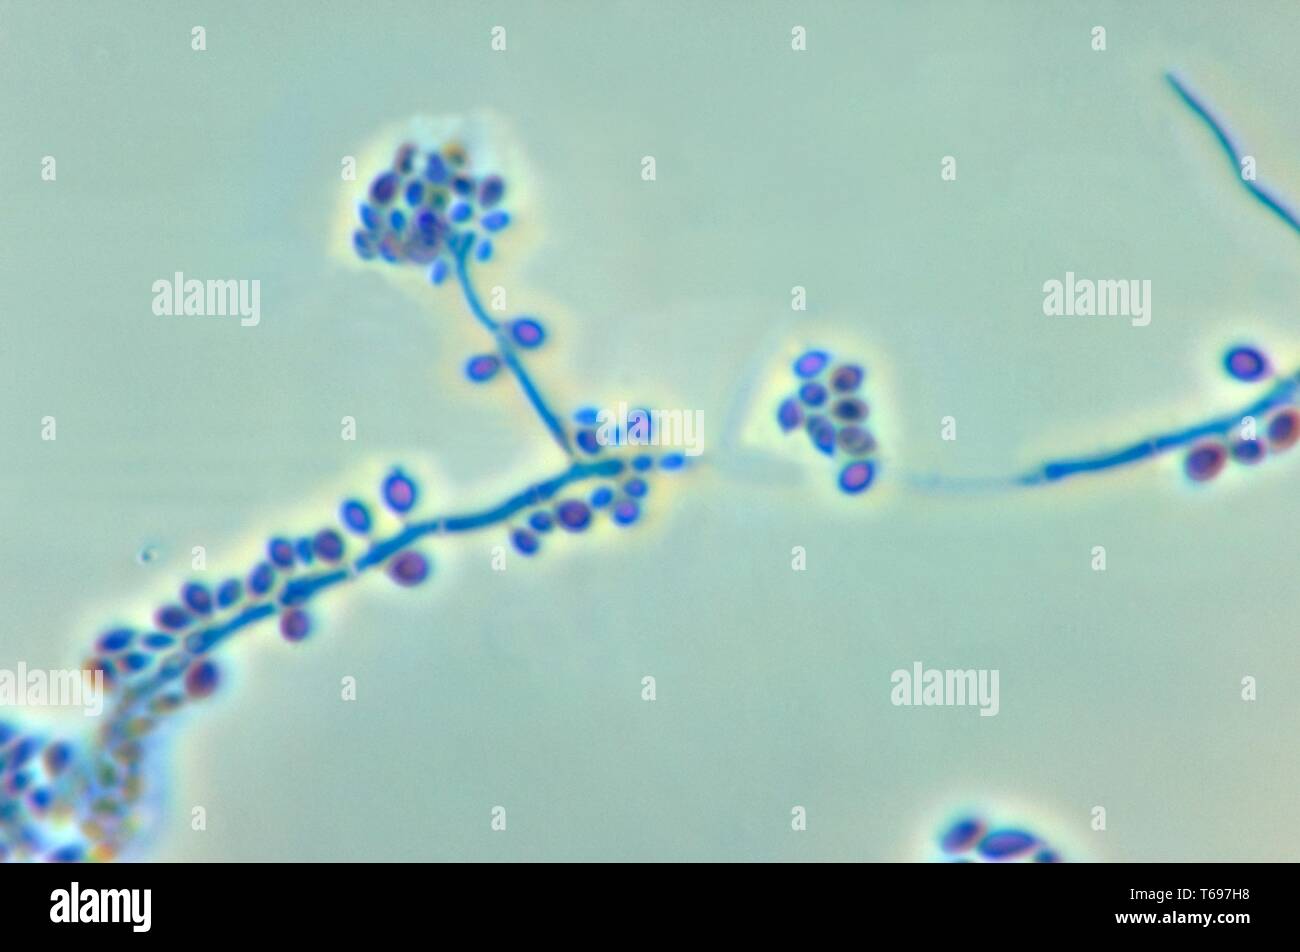 Photomicrograph of the conidiophores and conidia of the fungus Sporothrix schenckii, 1972. Image courtesy Centers for Disease Control and Prevention (CDC) / Dr Libero Ajello. () Stock Photo